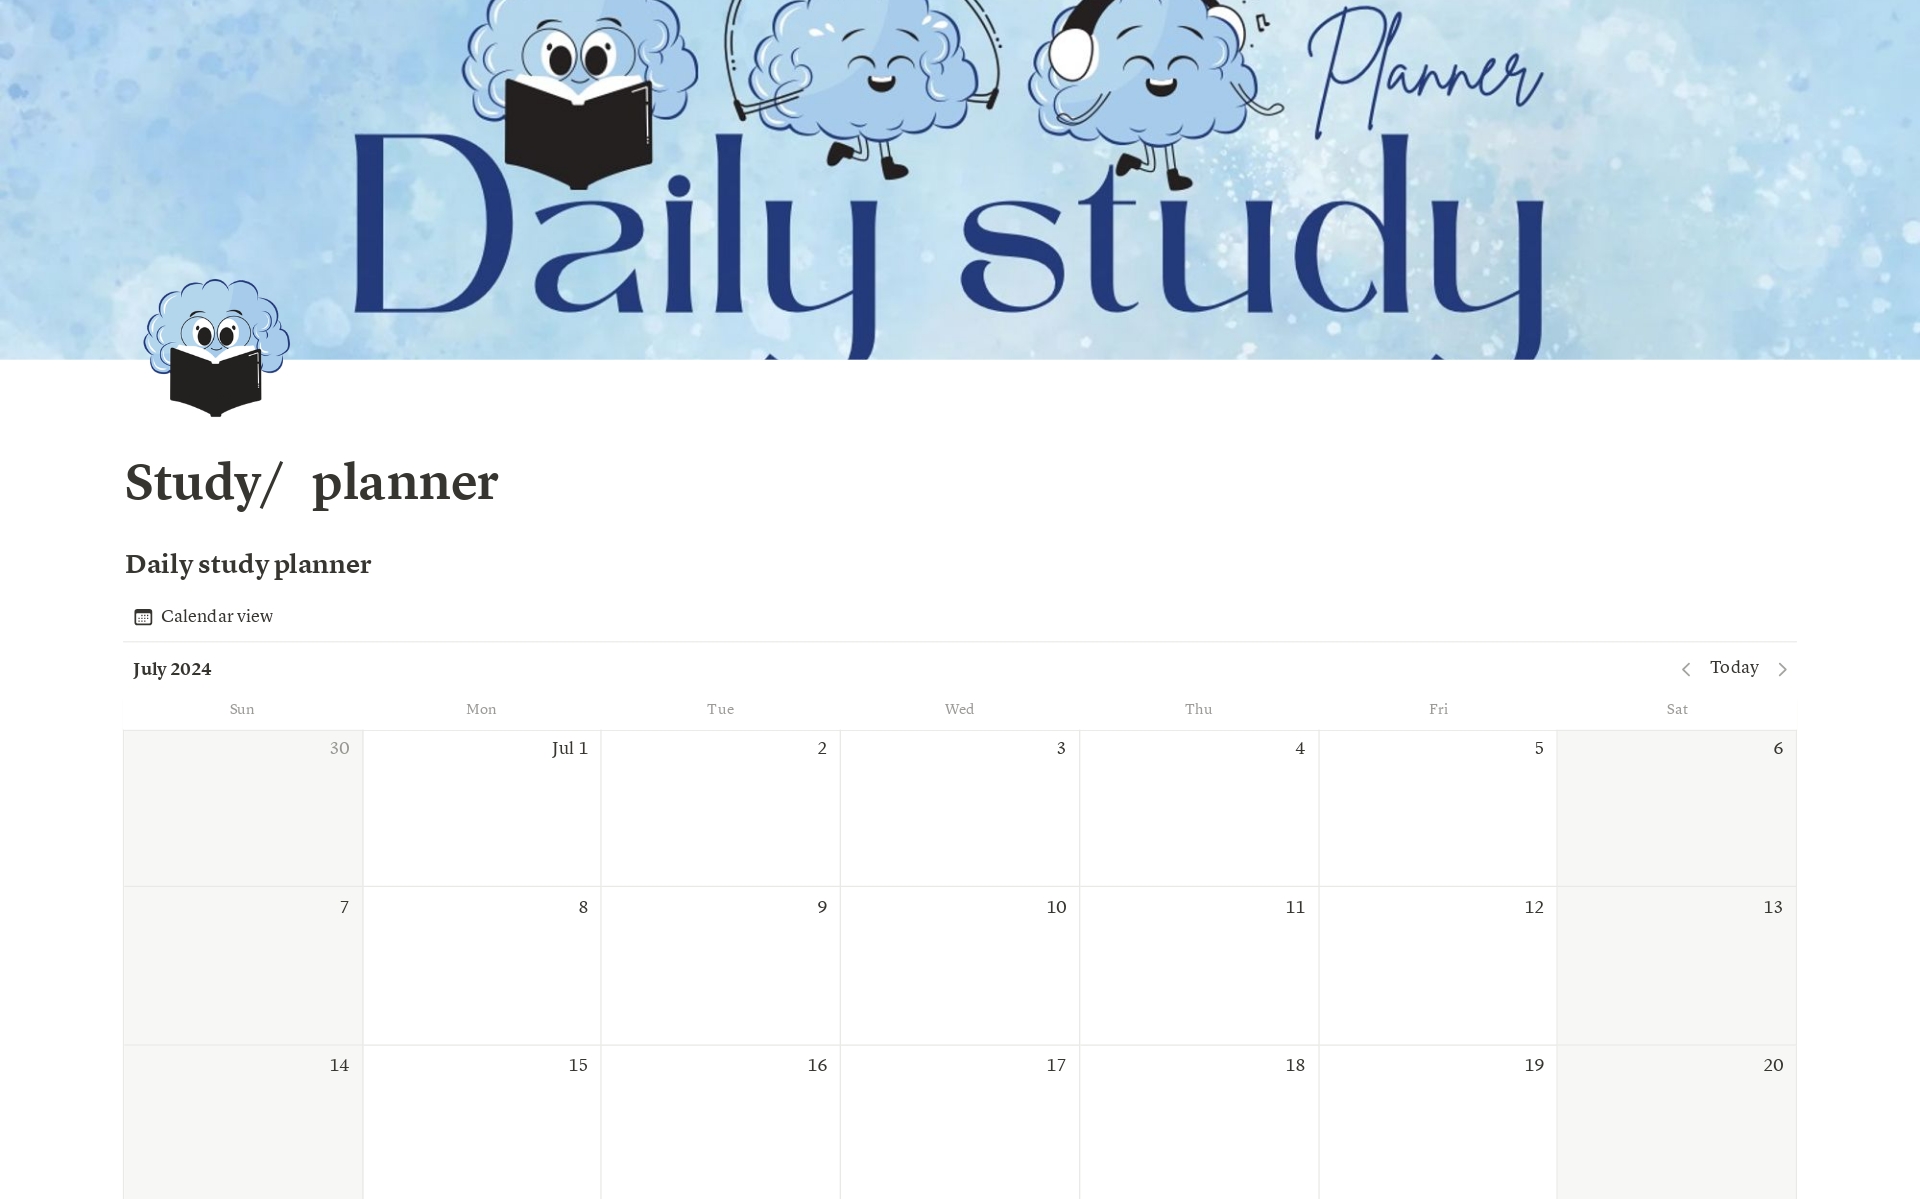 Daily study/pomodoro planner contains :

﻿﻿Monthly calendar

﻿﻿﻿Mood bar

﻿﻿productivity level

﻿﻿Today subject

﻿﻿Study goal

Schedule

﻿﻿Urgency Box

﻿﻿Handmade pomodoro planner